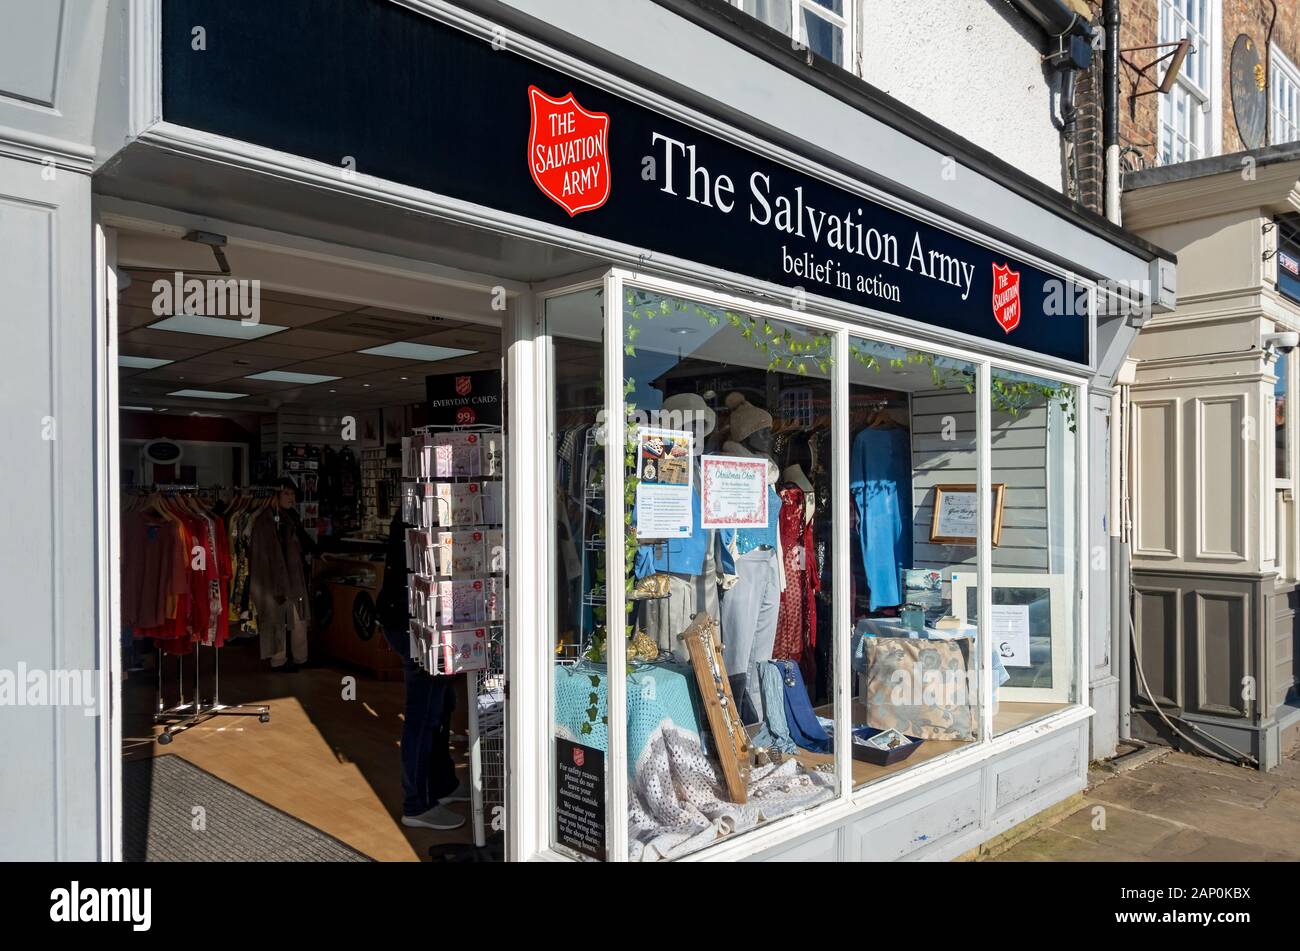 Salvation Army charity clothes shop store on the high street. Stock Photo